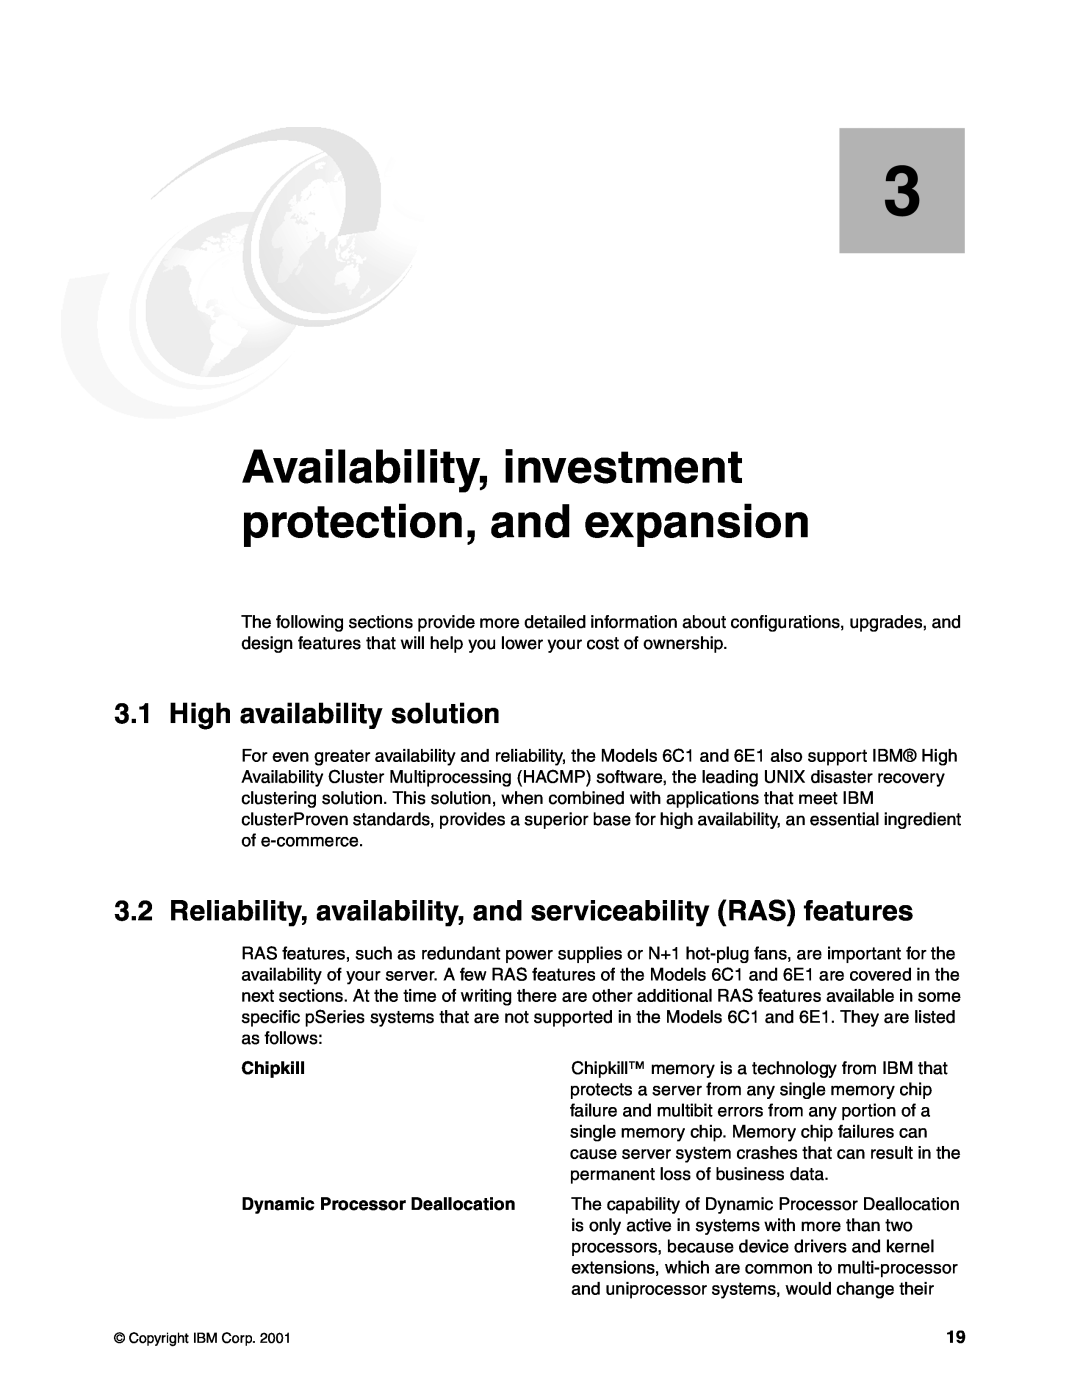 IBM 6E1, 6C1, 610 manual Availability, investment protection, and expansion, High availability solution 